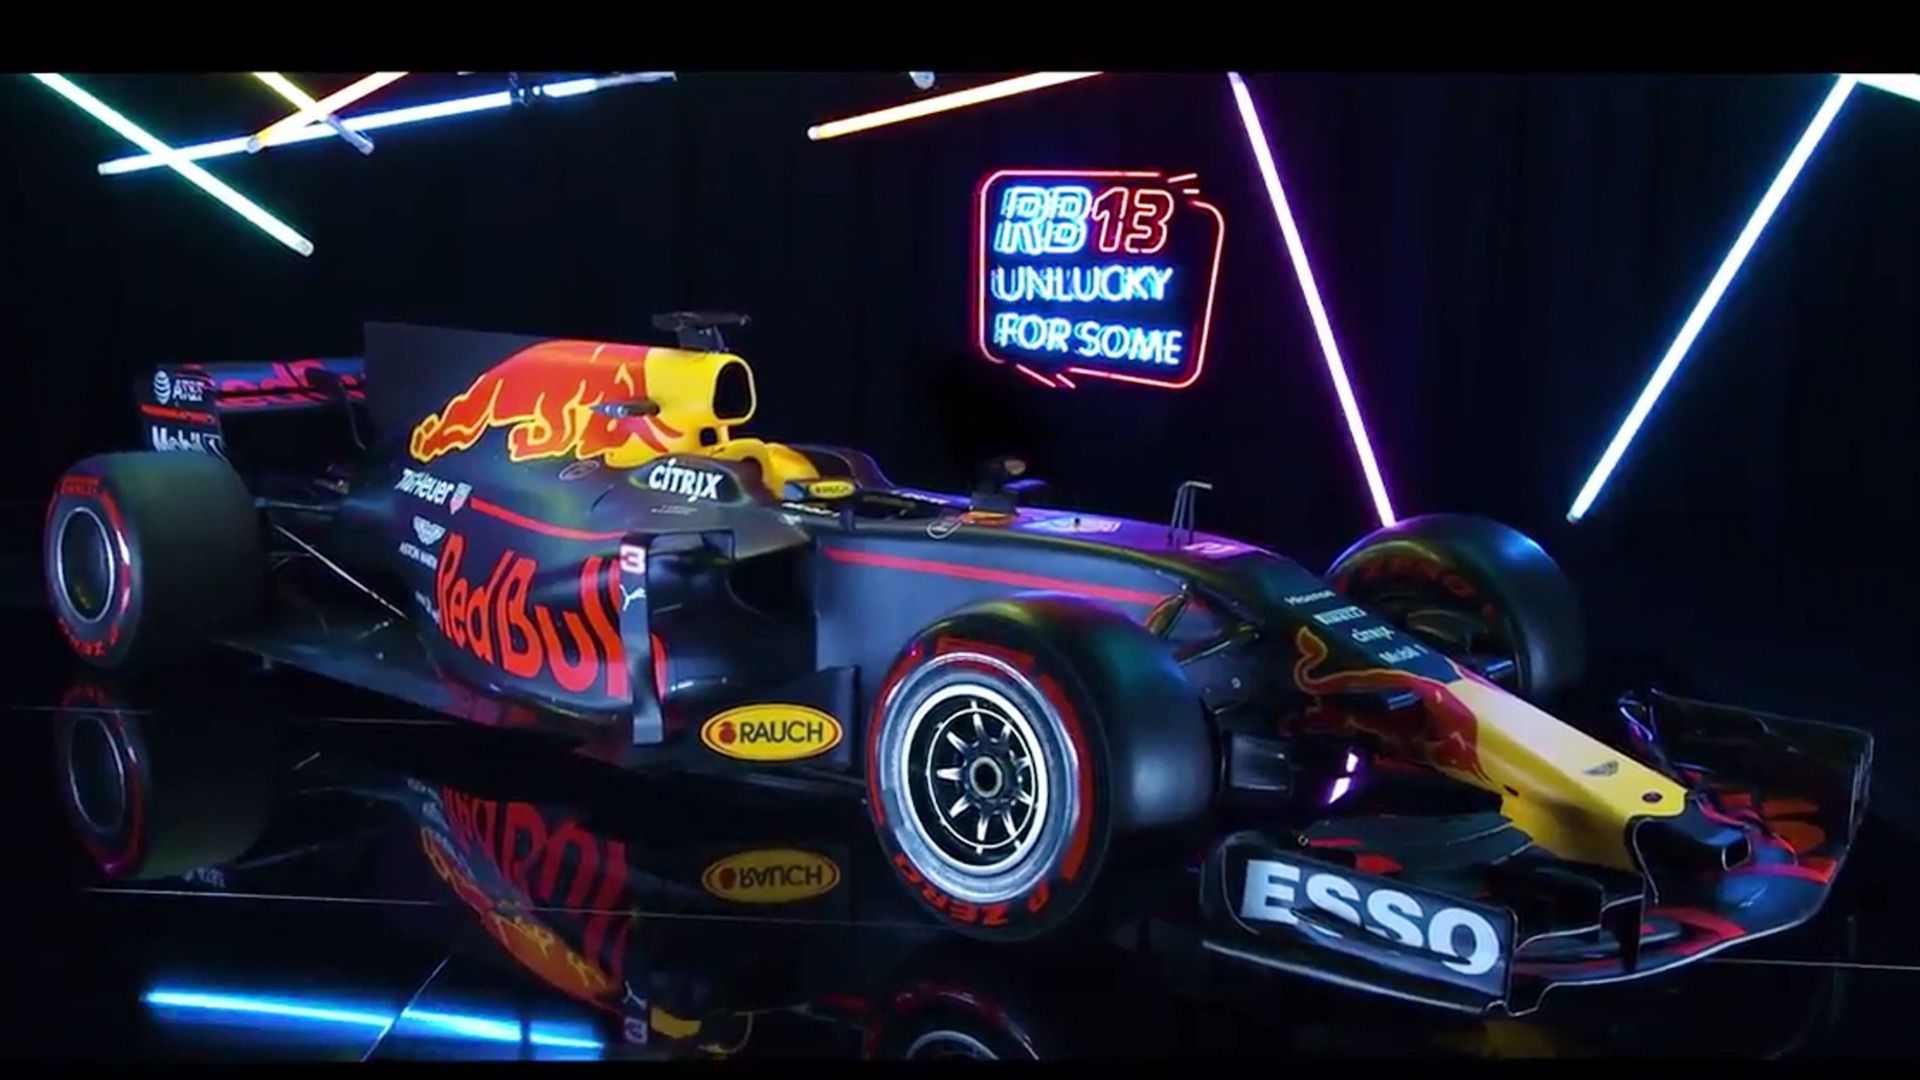 Red Bull launches its 2017 F1 car, the RB13